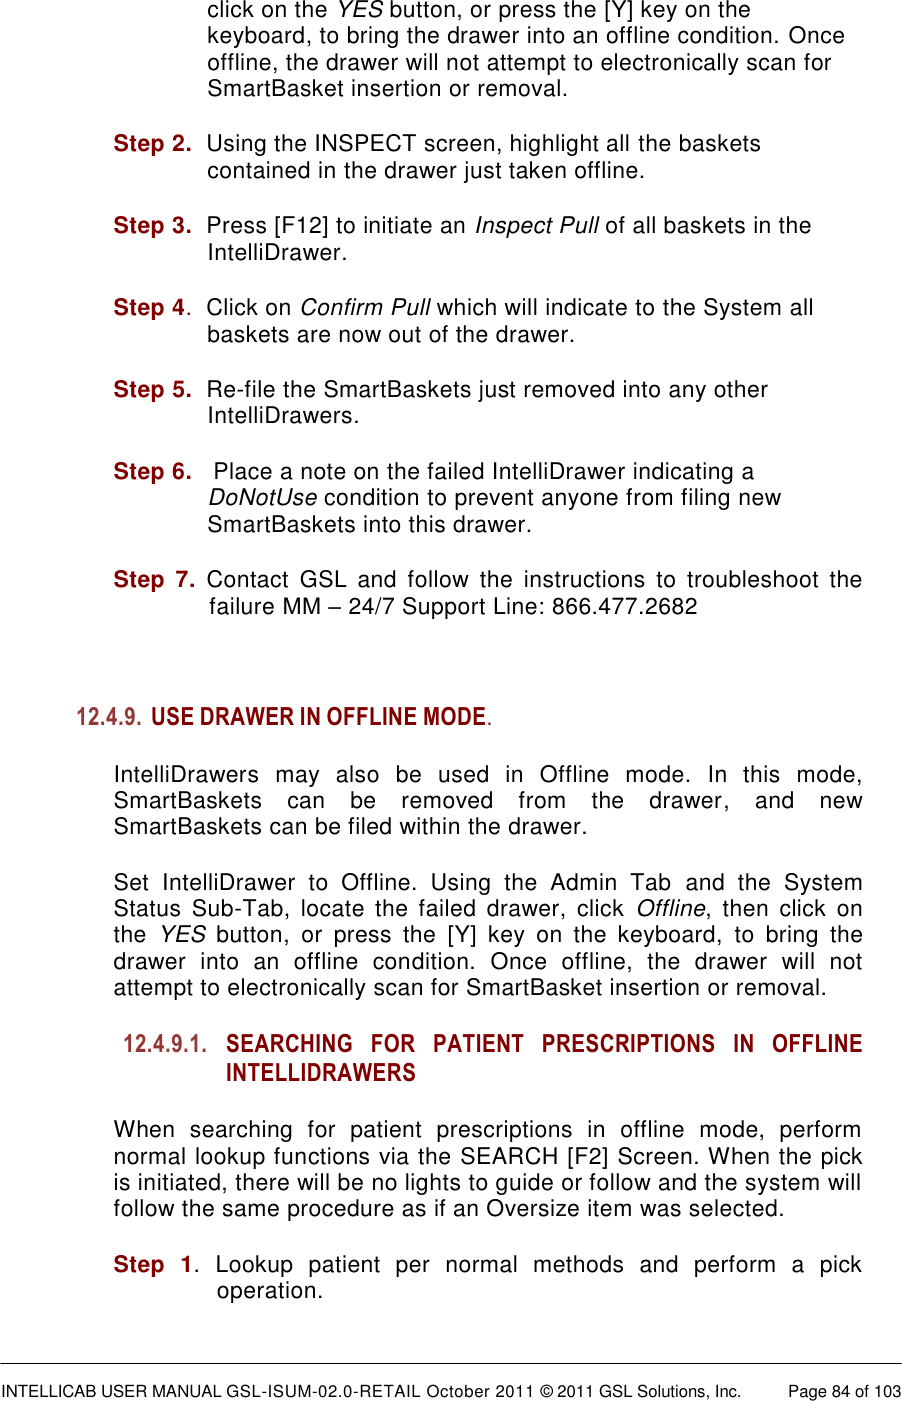  INTELLICAB USER MANUAL GSL-ISUM-02.0-RETAIL October 2011 © 2011 GSL Solutions, Inc.   Page 84 of 103   click on the YES button, or press the [Y] key on the keyboard, to bring the drawer into an offline condition. Once offline, the drawer will not attempt to electronically scan for SmartBasket insertion or removal. Step 2.  Using the INSPECT screen, highlight all the baskets contained in the drawer just taken offline. Step 3.  Press [F12] to initiate an Inspect Pull of all baskets in the IntelliDrawer. Step 4.  Click on Confirm Pull which will indicate to the System all baskets are now out of the drawer. Step 5.  Re-file the SmartBaskets just removed into any other IntelliDrawers. Step 6.   Place a note on the failed IntelliDrawer indicating a DoNotUse condition to prevent anyone from filing new SmartBaskets into this drawer. Step  7. Contact  GSL  and  follow  the  instructions  to  troubleshoot  the failure ММ – 24/7 Support Line: 866.477.2682  12.4.9. USE DRAWER IN OFFLINE MODE.  IntelliDrawers  may  also  be  used  in  Offline  mode.  In  this  mode, SmartBaskets  can  be  removed  from  the  drawer,  and  new SmartBaskets can be filed within the drawer. Set  IntelliDrawer  to  Offline.  Using  the  Admin  Tab  and  the  System Status  Sub-Tab,  locate  the  failed  drawer,  click  Offline,  then  click  on the  YES  button,  or  press  the  [Y]  key  on  the  keyboard,  to  bring  the drawer  into  an  offline  condition.  Once  offline,  the  drawer  will  not attempt to electronically scan for SmartBasket insertion or removal. 12.4.9.1. SEARCHING FOR PATIENT PRESCRIPTIONS IN OFFLINE INTELLIDRAWERS When  searching  for  patient  prescriptions  in  offline  mode,  perform normal lookup functions via the SEARCH [F2] Screen. When the pick is initiated, there will be no lights to guide or follow and the system will follow the same procedure as if an Oversize item was selected.  Step  1.  Lookup  patient  per  normal  methods  and  perform  a  pick operation. 